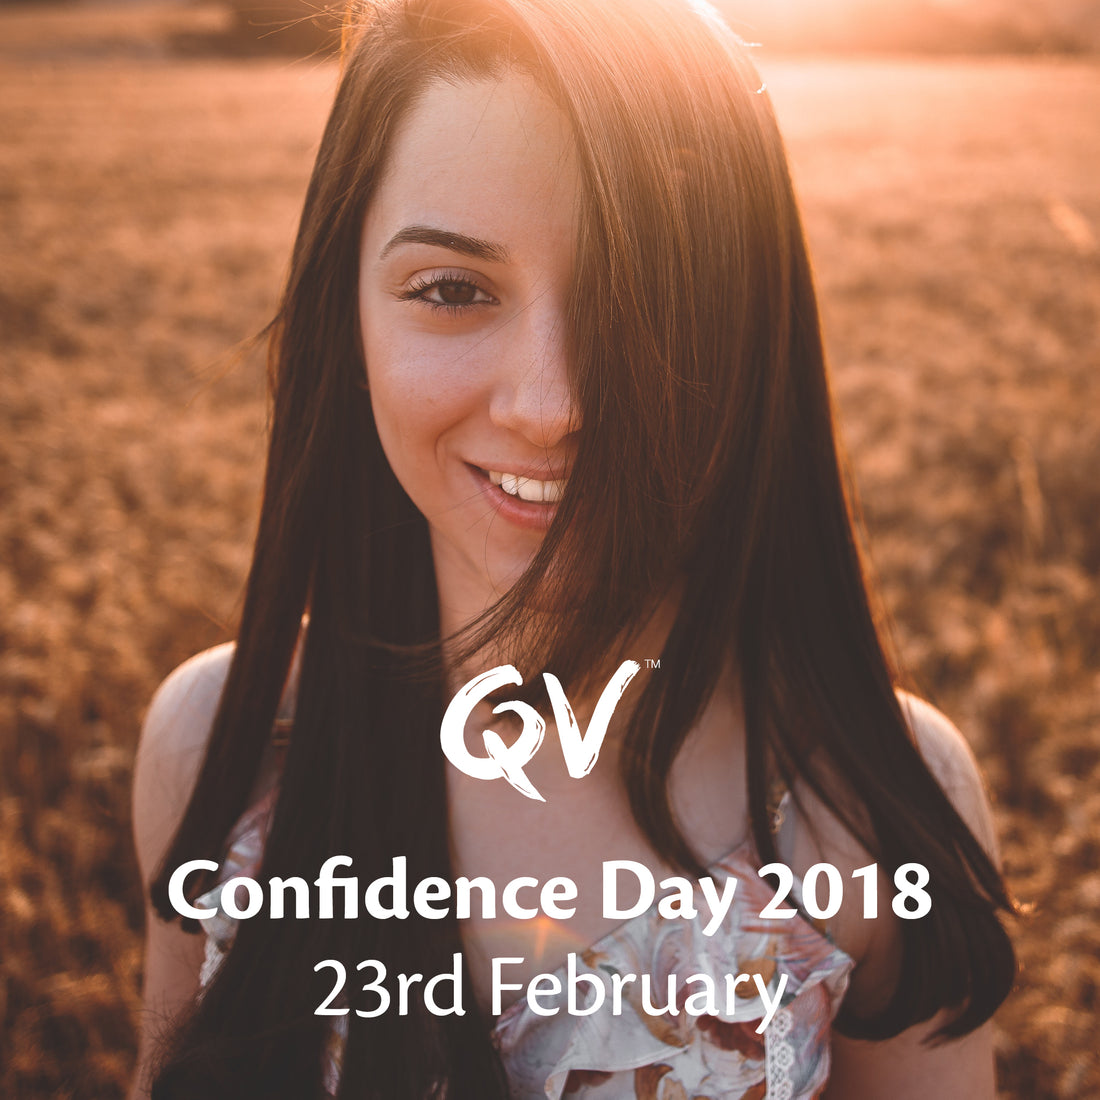 SAVE THE DATE AND JOIN HANDS FOR QV CONFIDENCE DAY 2018